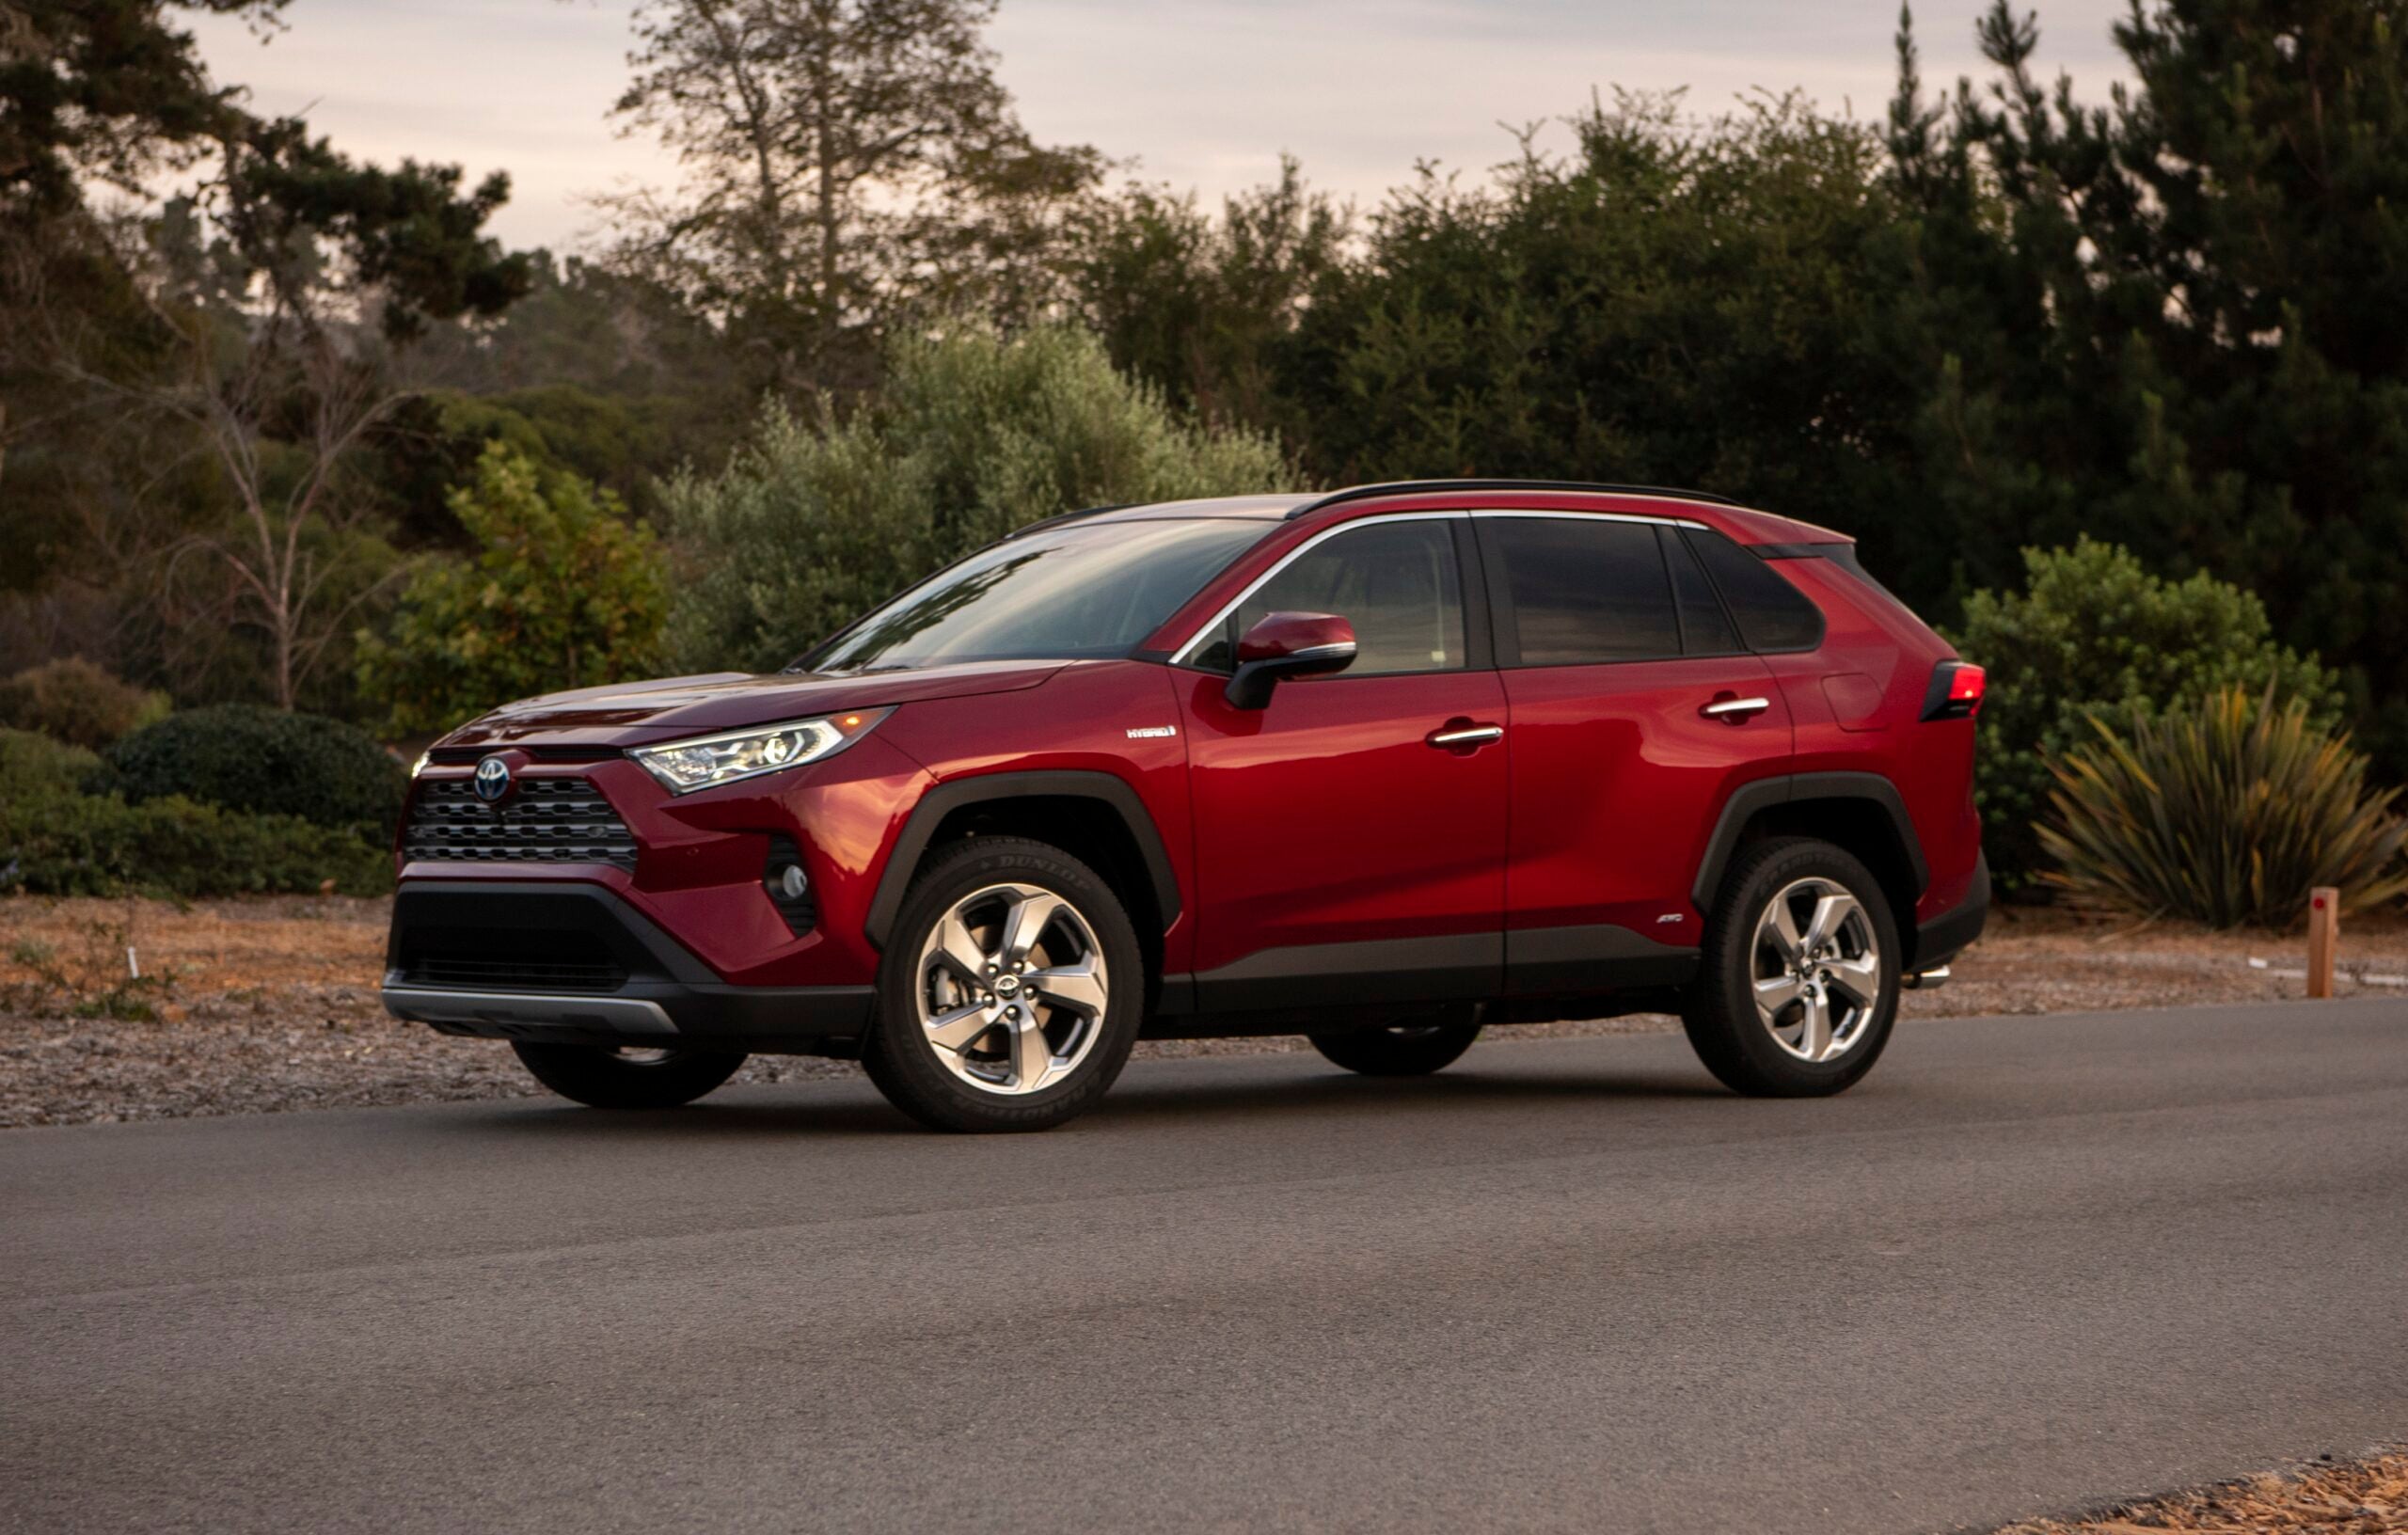 The all-new 2019 Toyota RAV4 gets upgraded capability and improved features